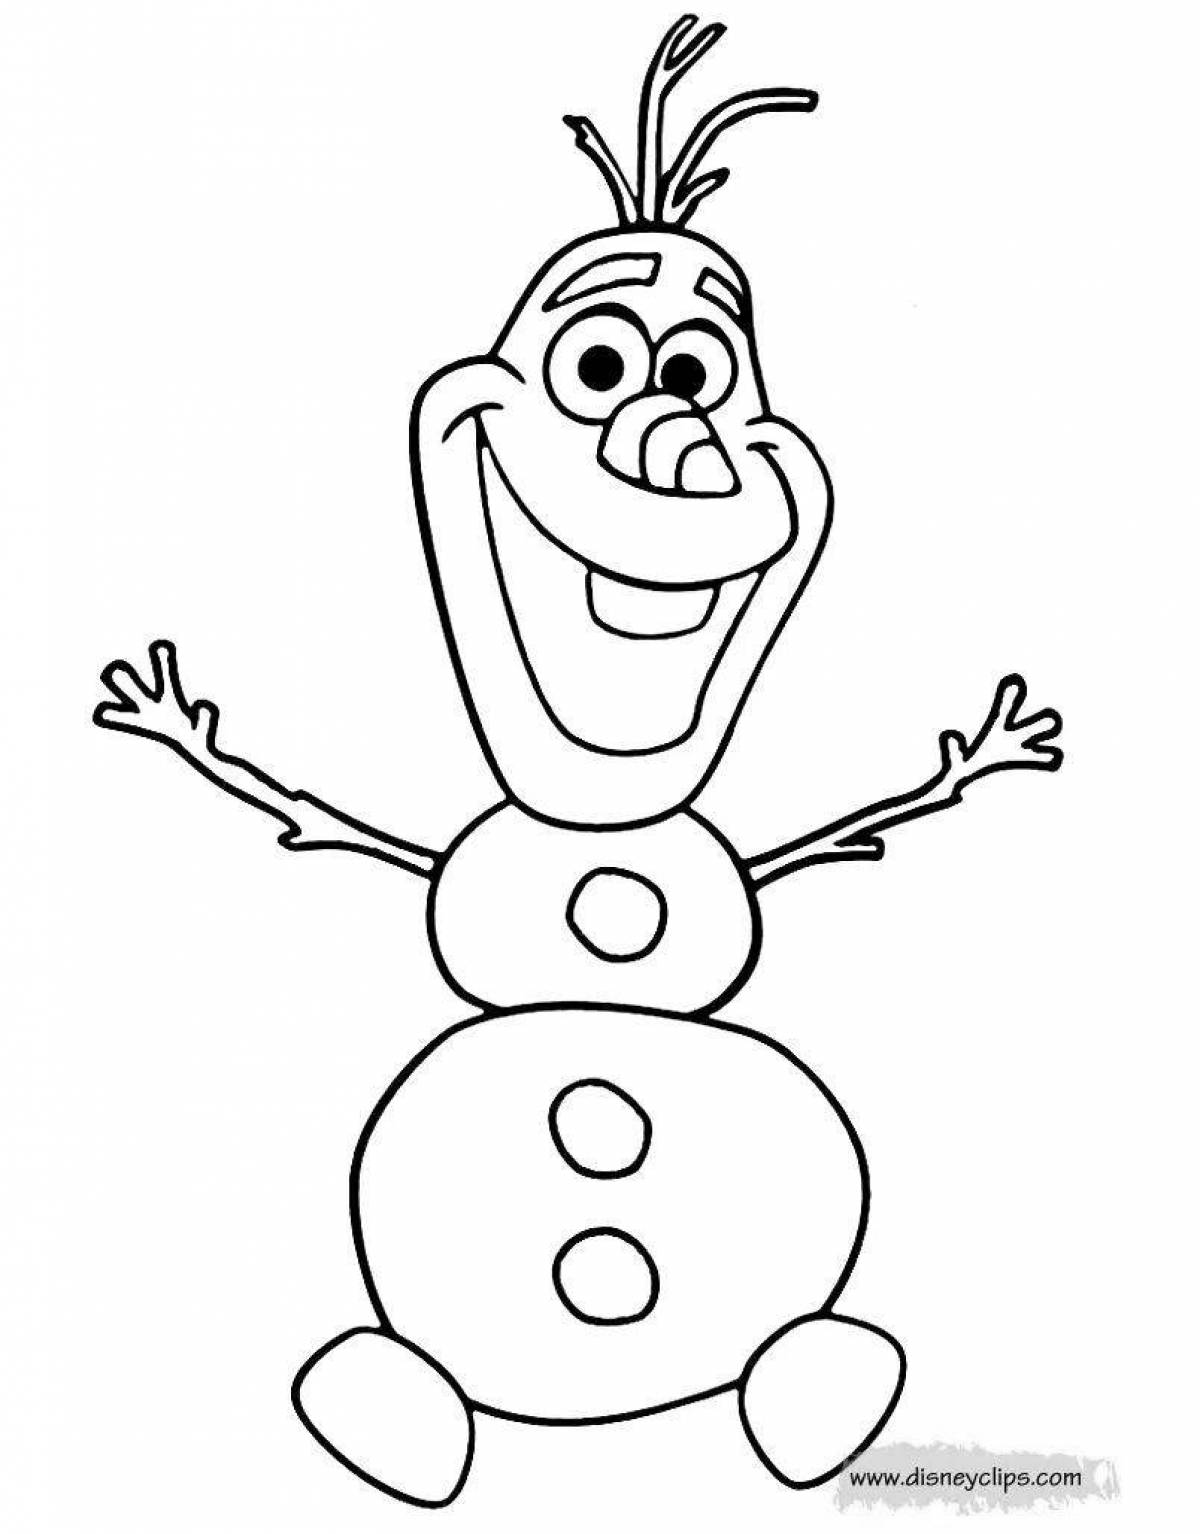 Olaf's snowman holiday coloring page